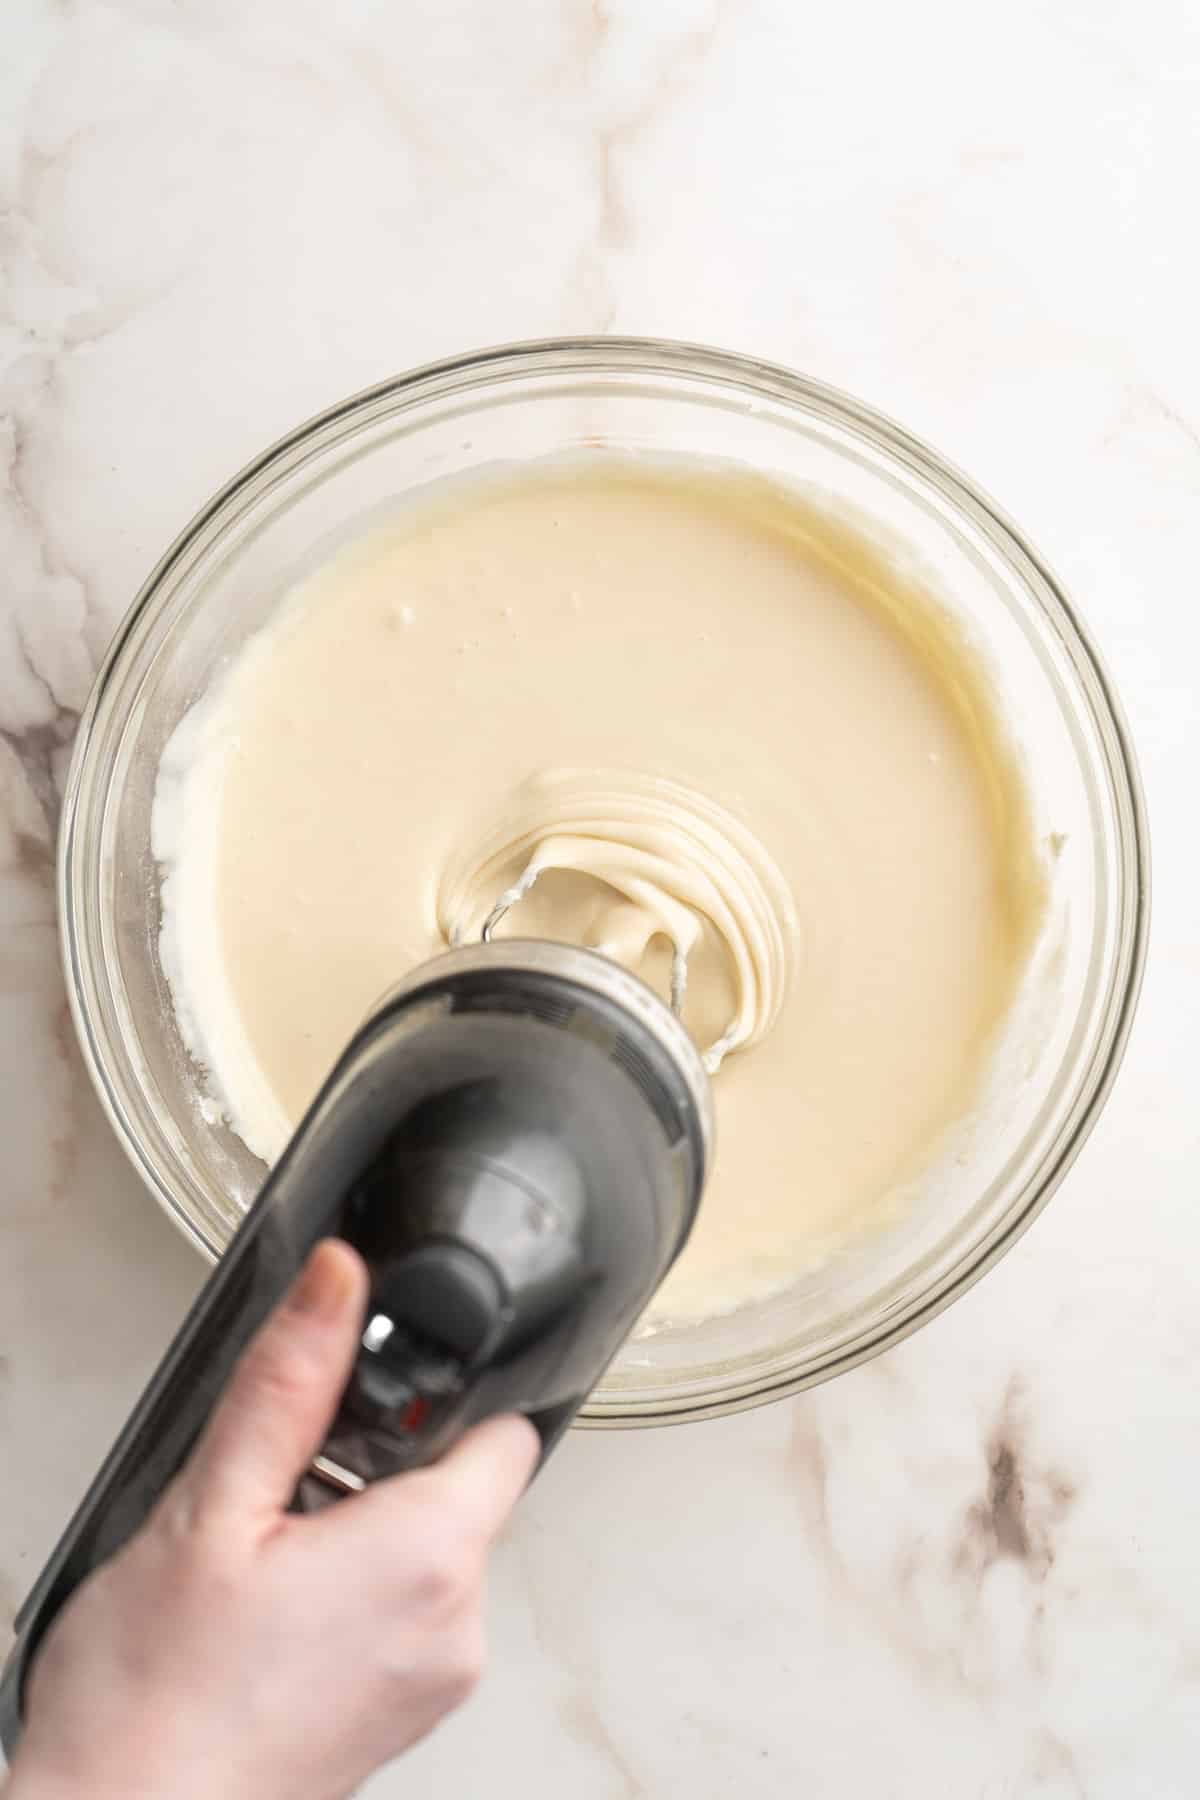 Using a handheld mixer to beat together the cream cheese filling.